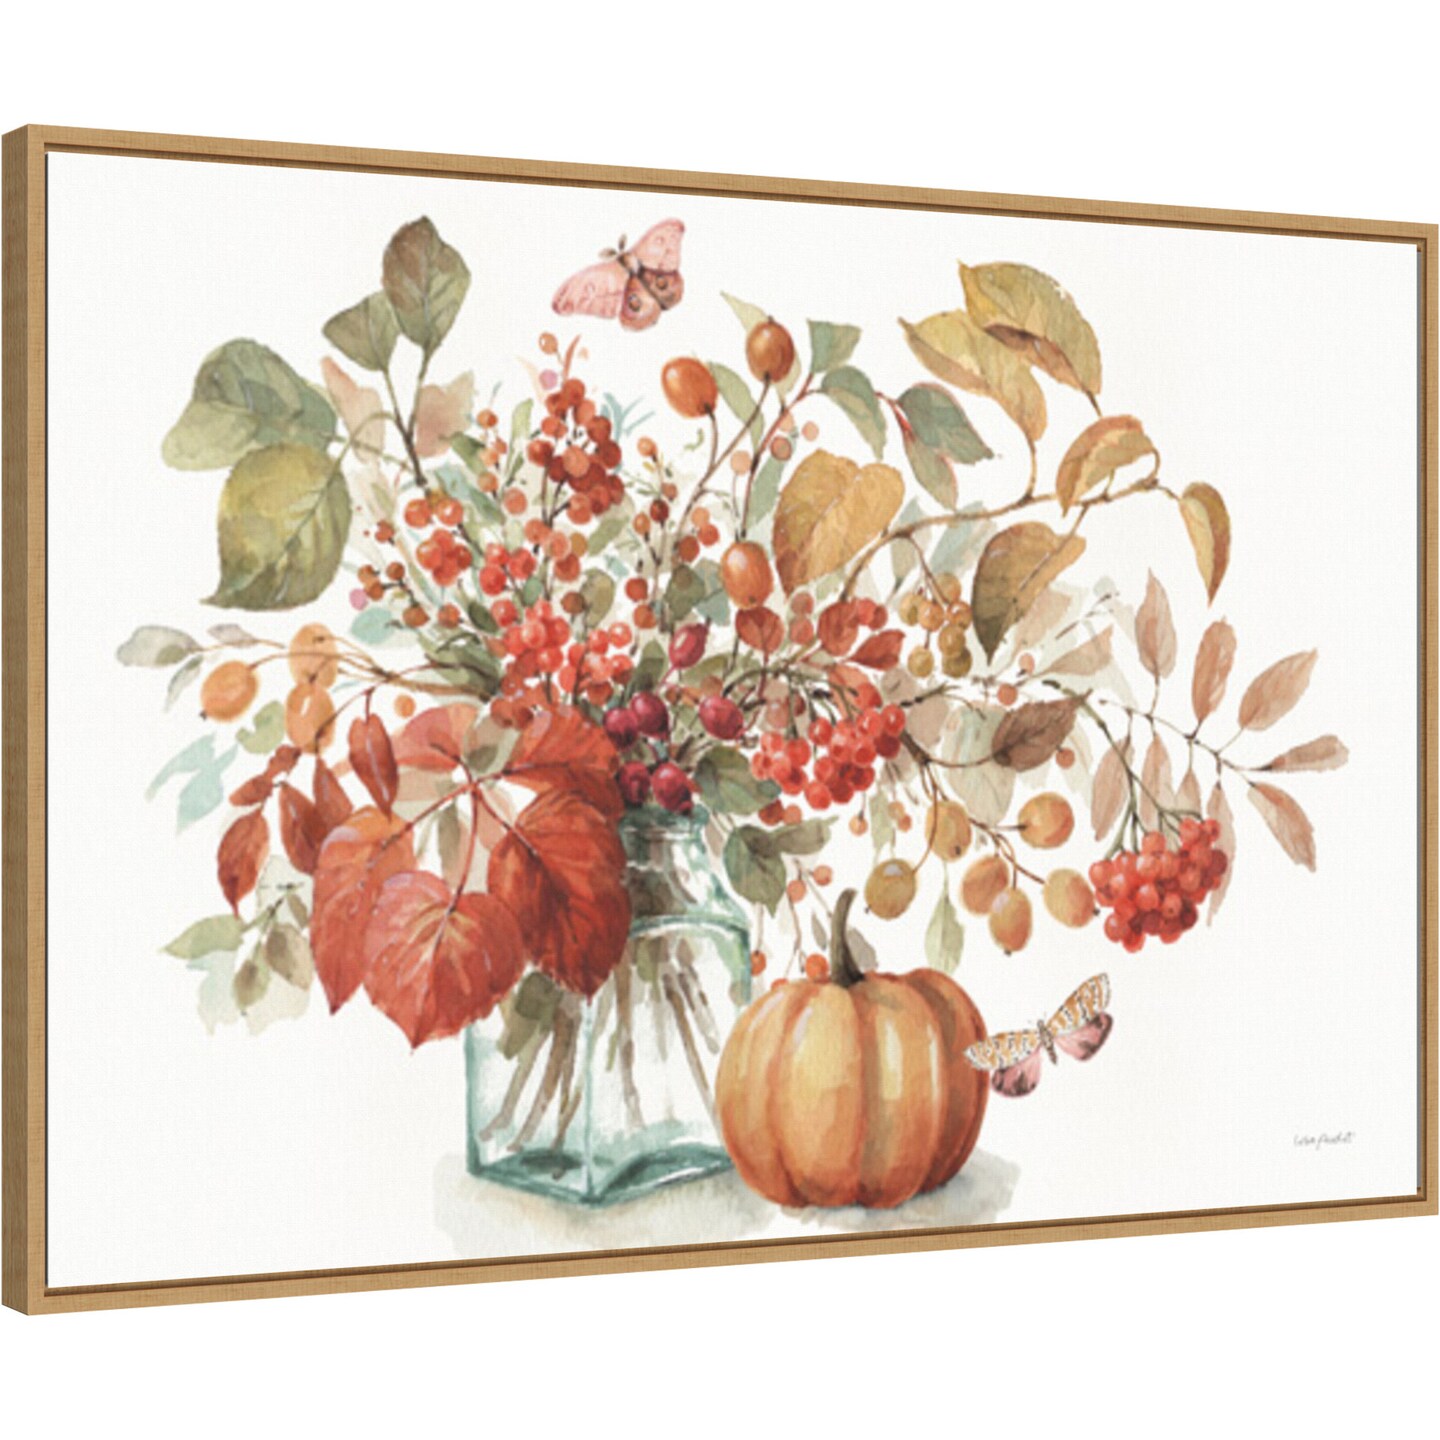 Autumn in Nature 01 on White by Lisa Audit 33-in. W x 23-in. H. Canvas Wall Art Print Framed in Natural